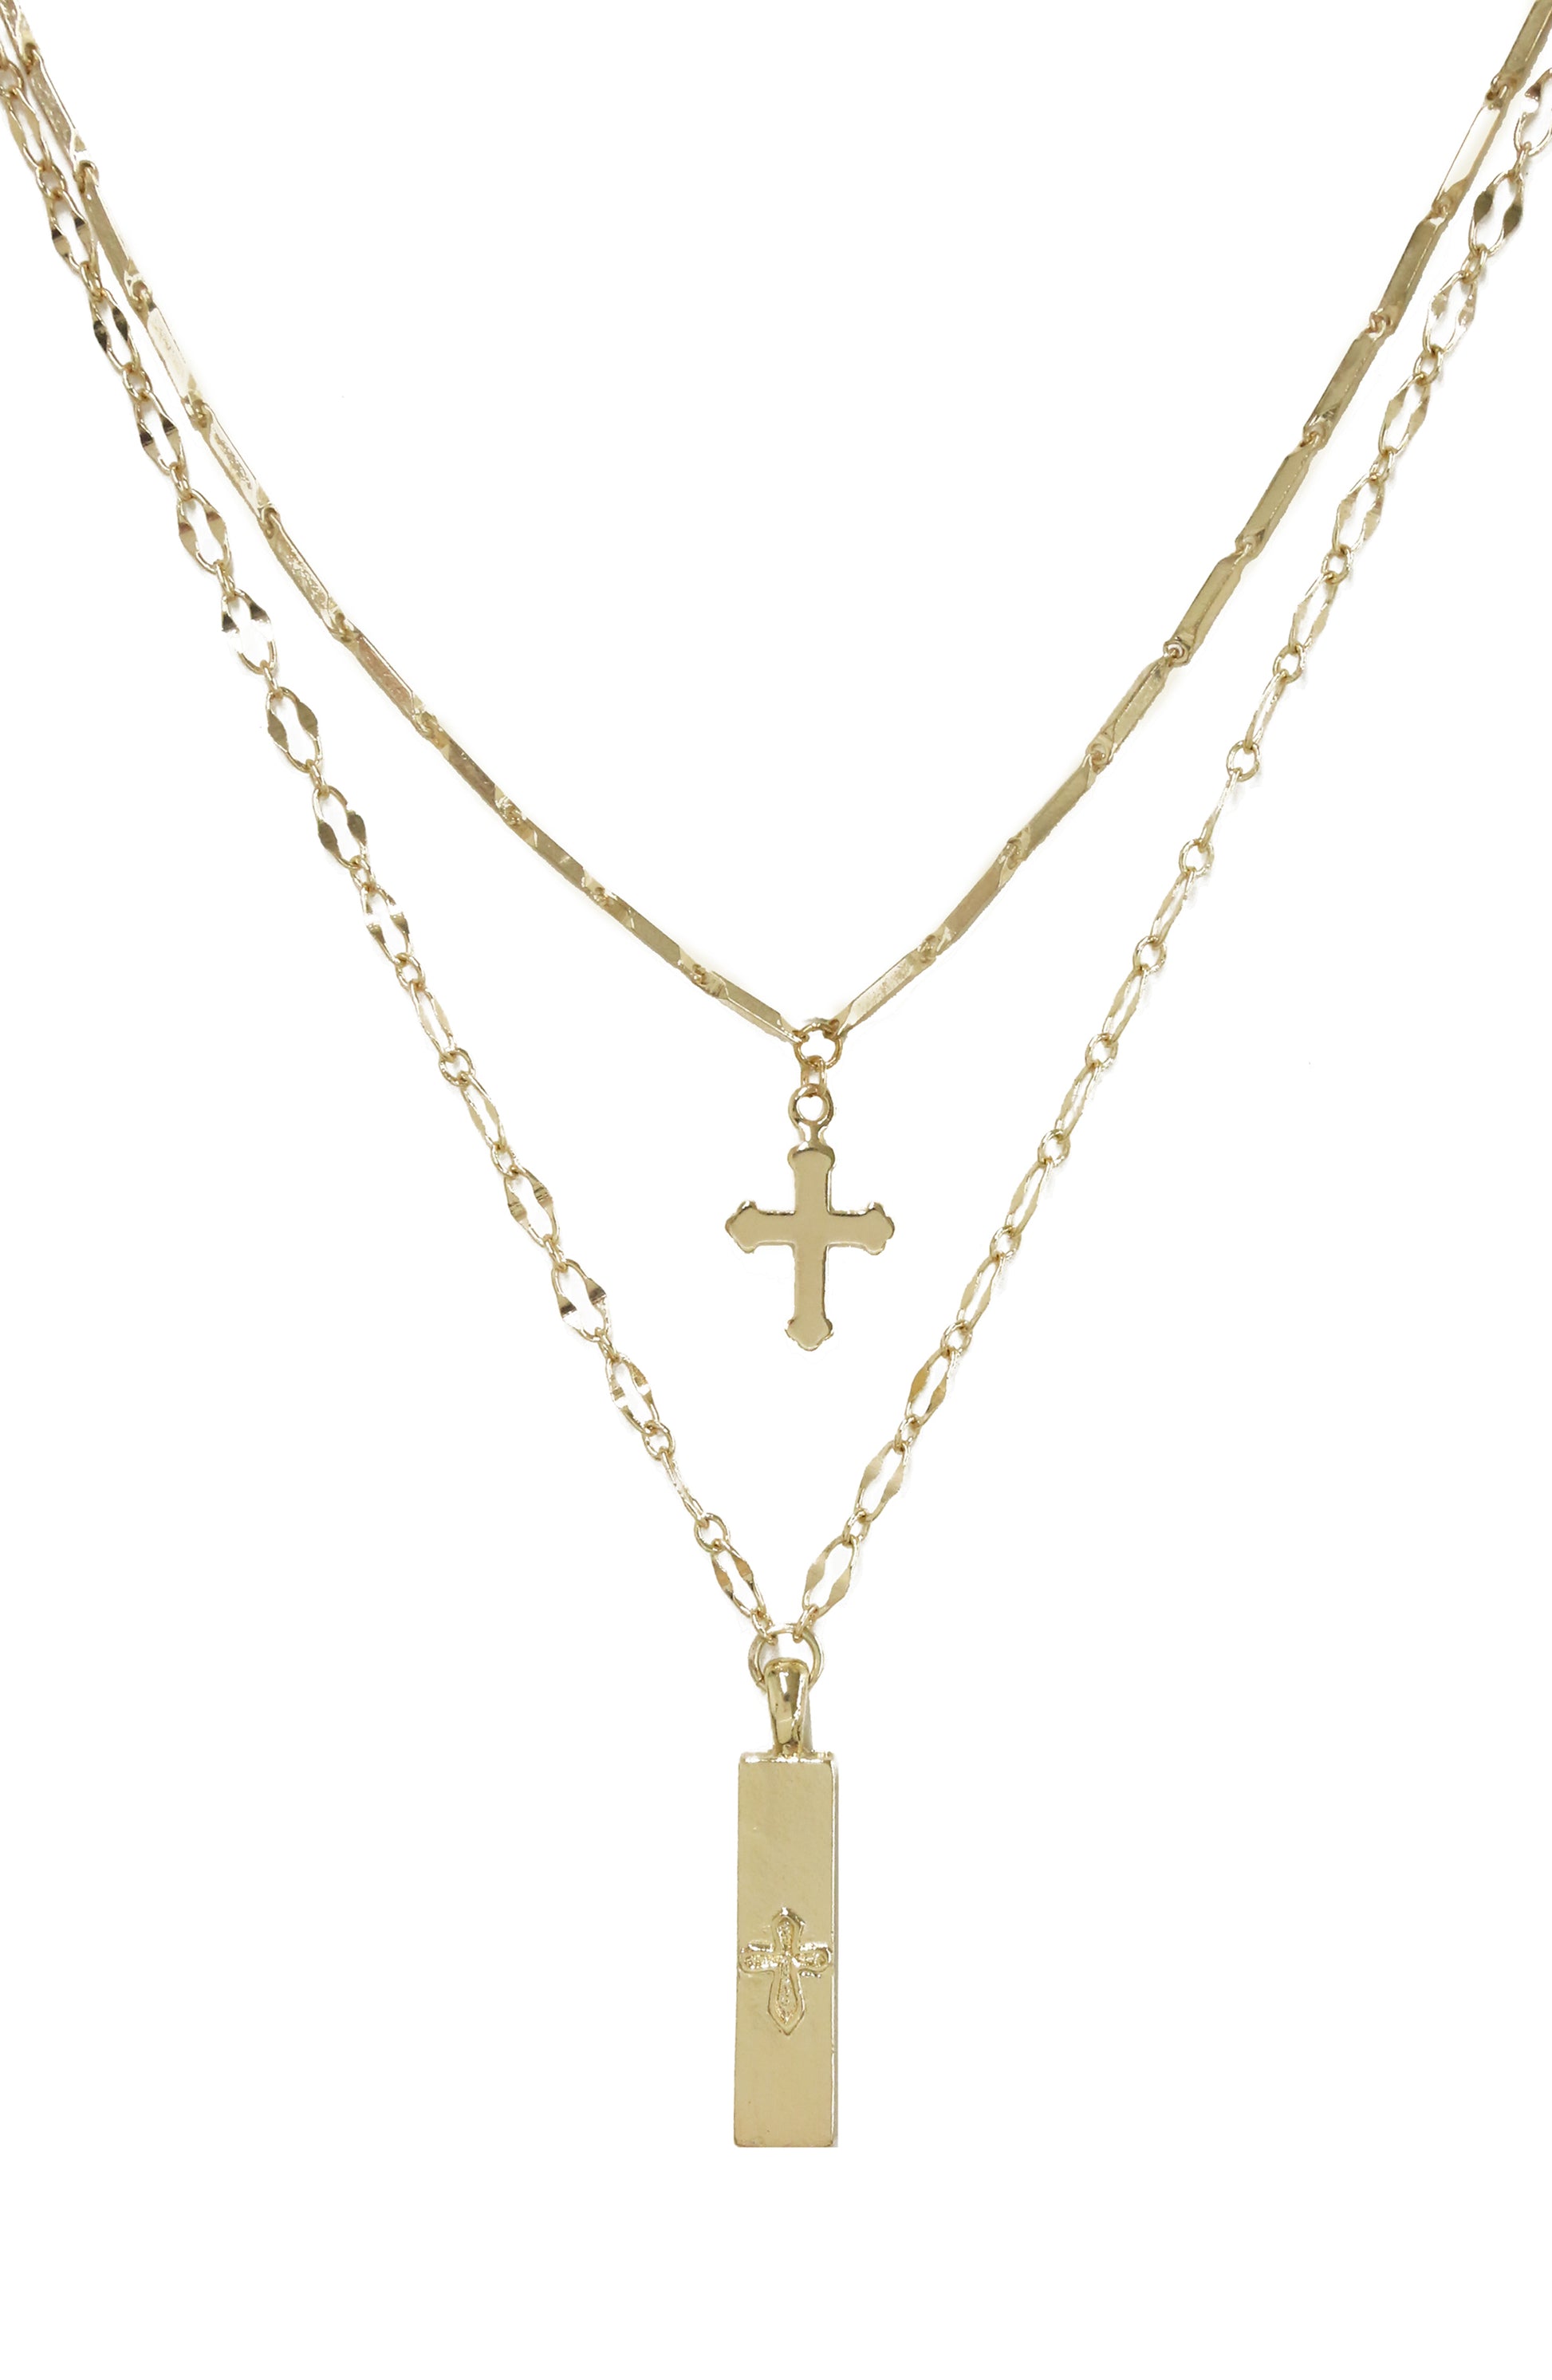 Your Highness 18k Gold Plated Cross Necklace Set